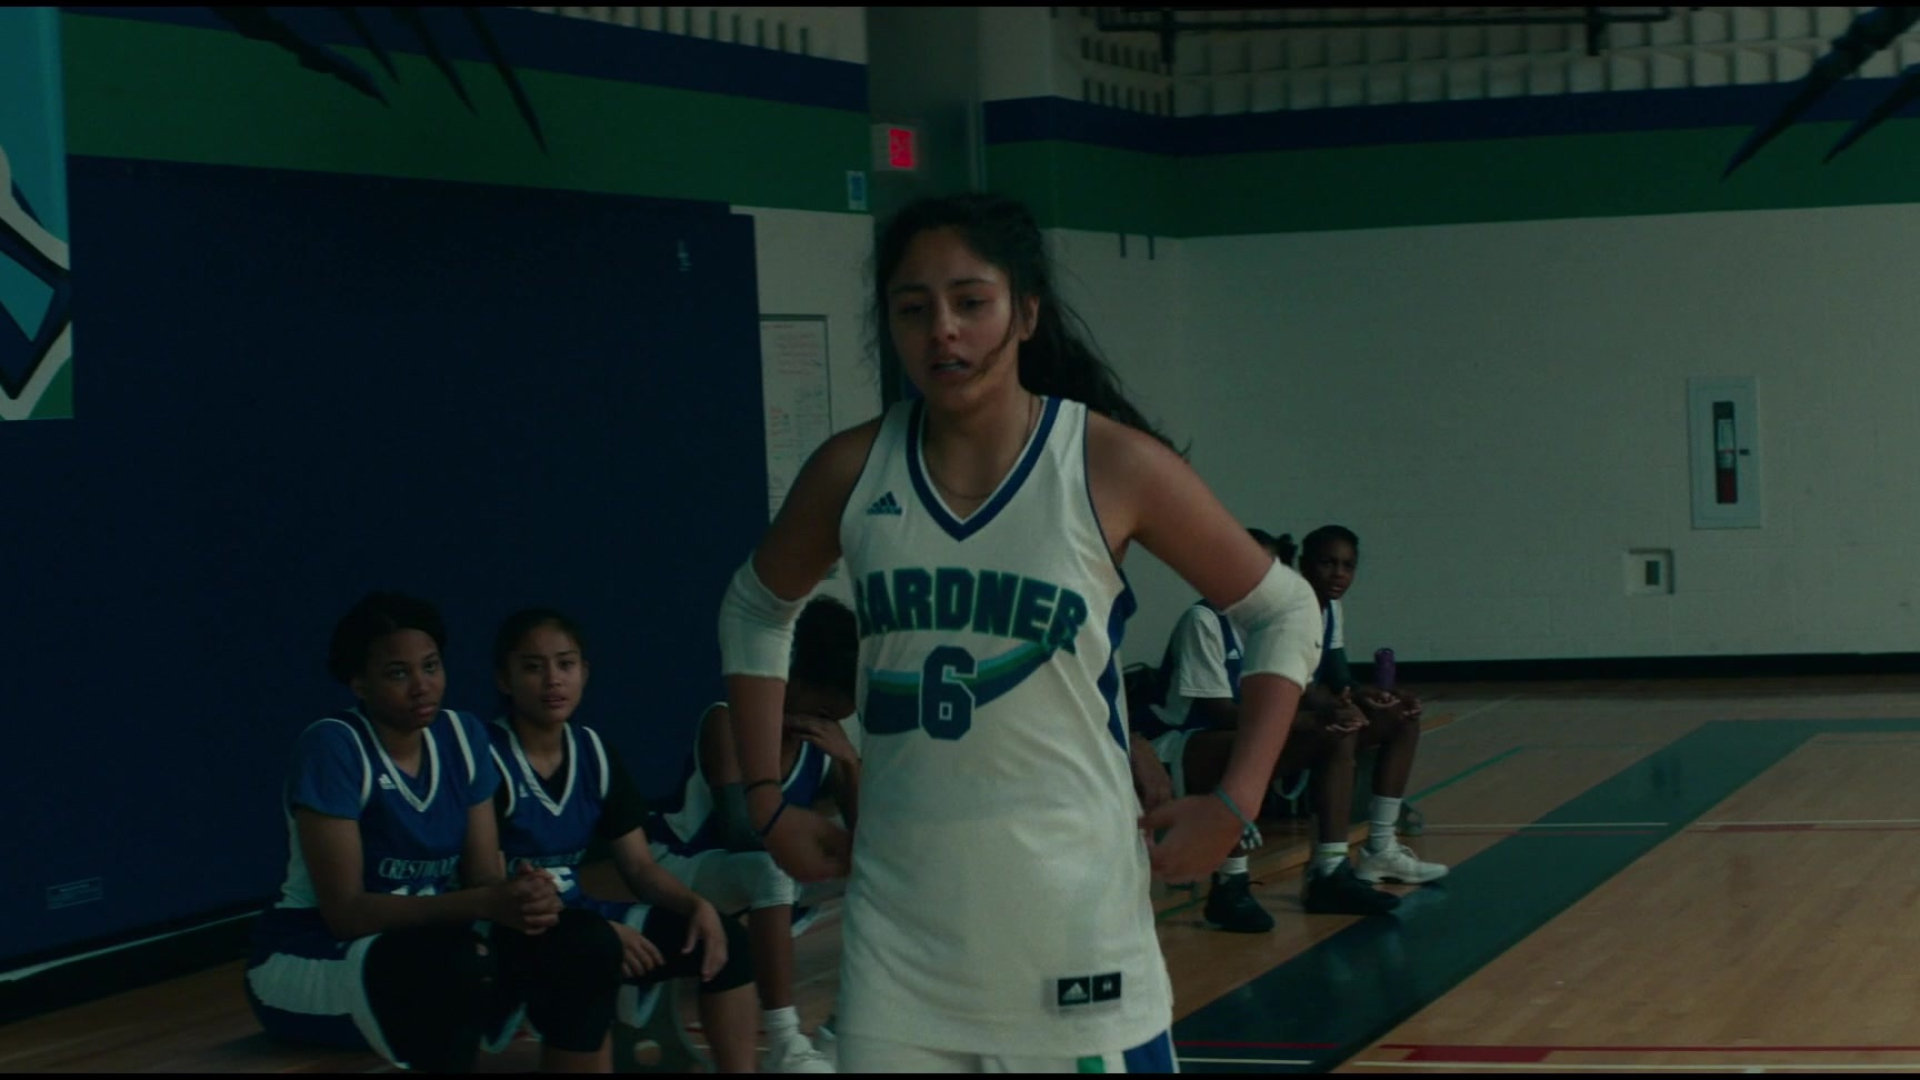 Rhianne Barreto, Share 2019 movie, Adidas jersey fashion, Up-and-coming actress, 1920x1080 Full HD Desktop